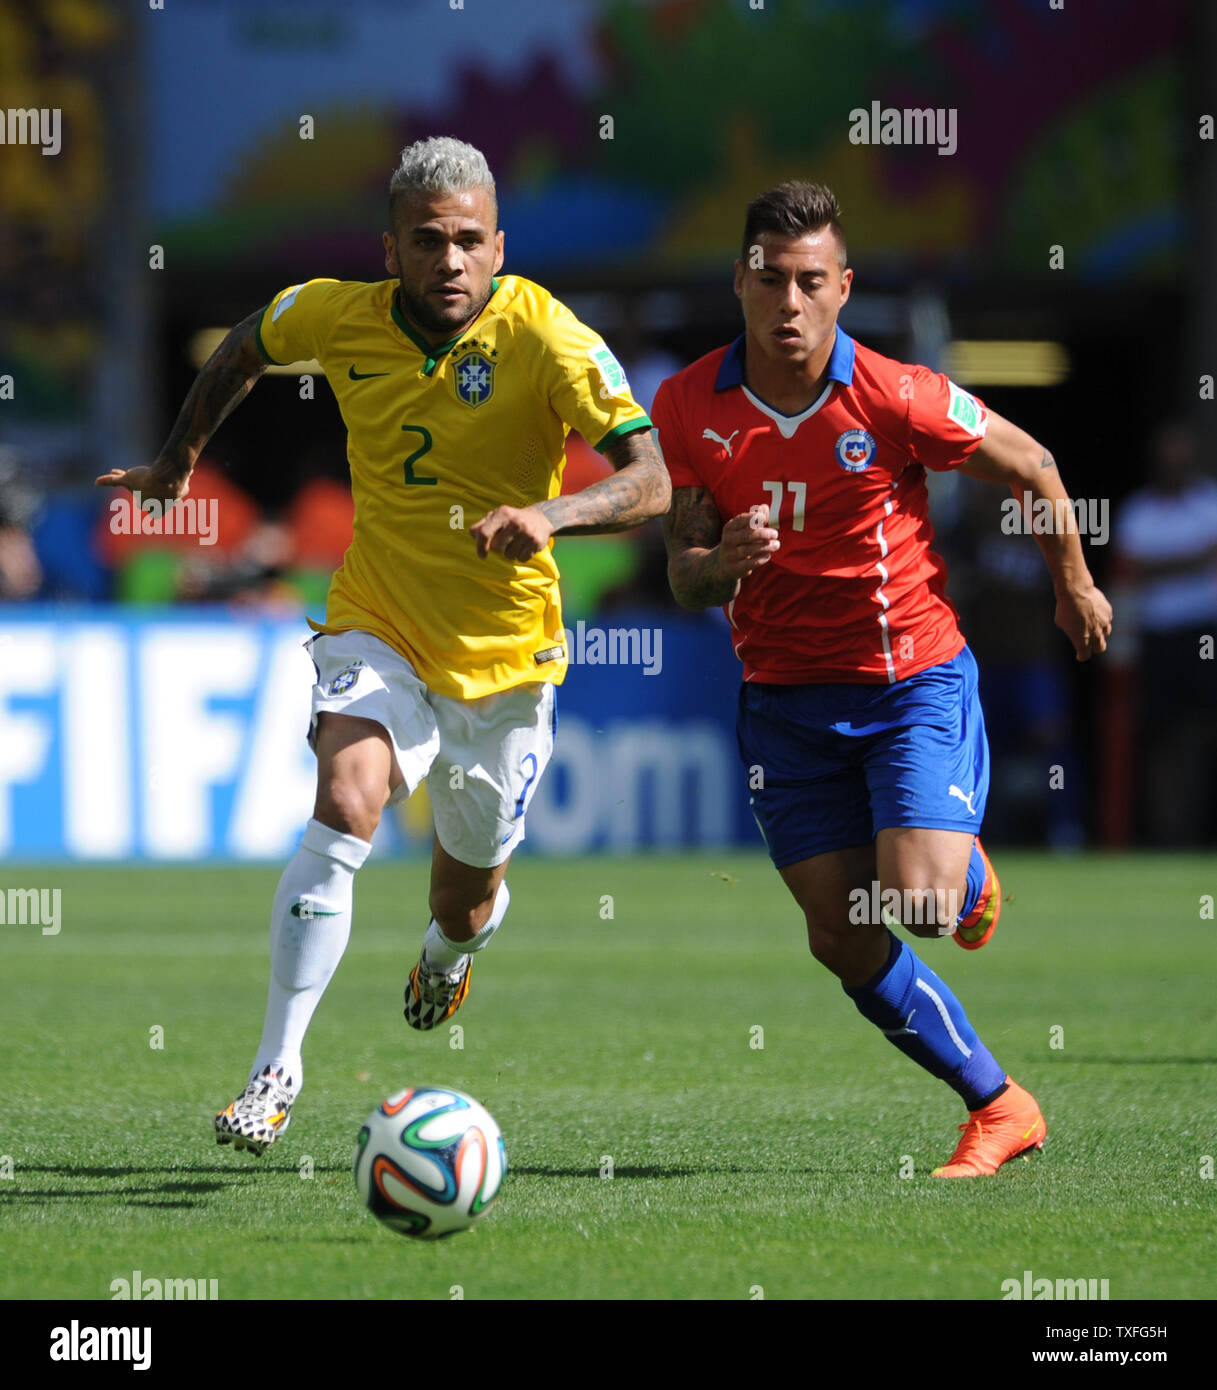 Dani Alves (L) of Brazil is chased by Eduardo Vargas of Chile during the 2014 FIFA World Cup Round of 16 match at the Estadio Mineirao in Belo Horizonte, Brazil on June 28, 2014. UPI/Chris Brunskill Stock Photo